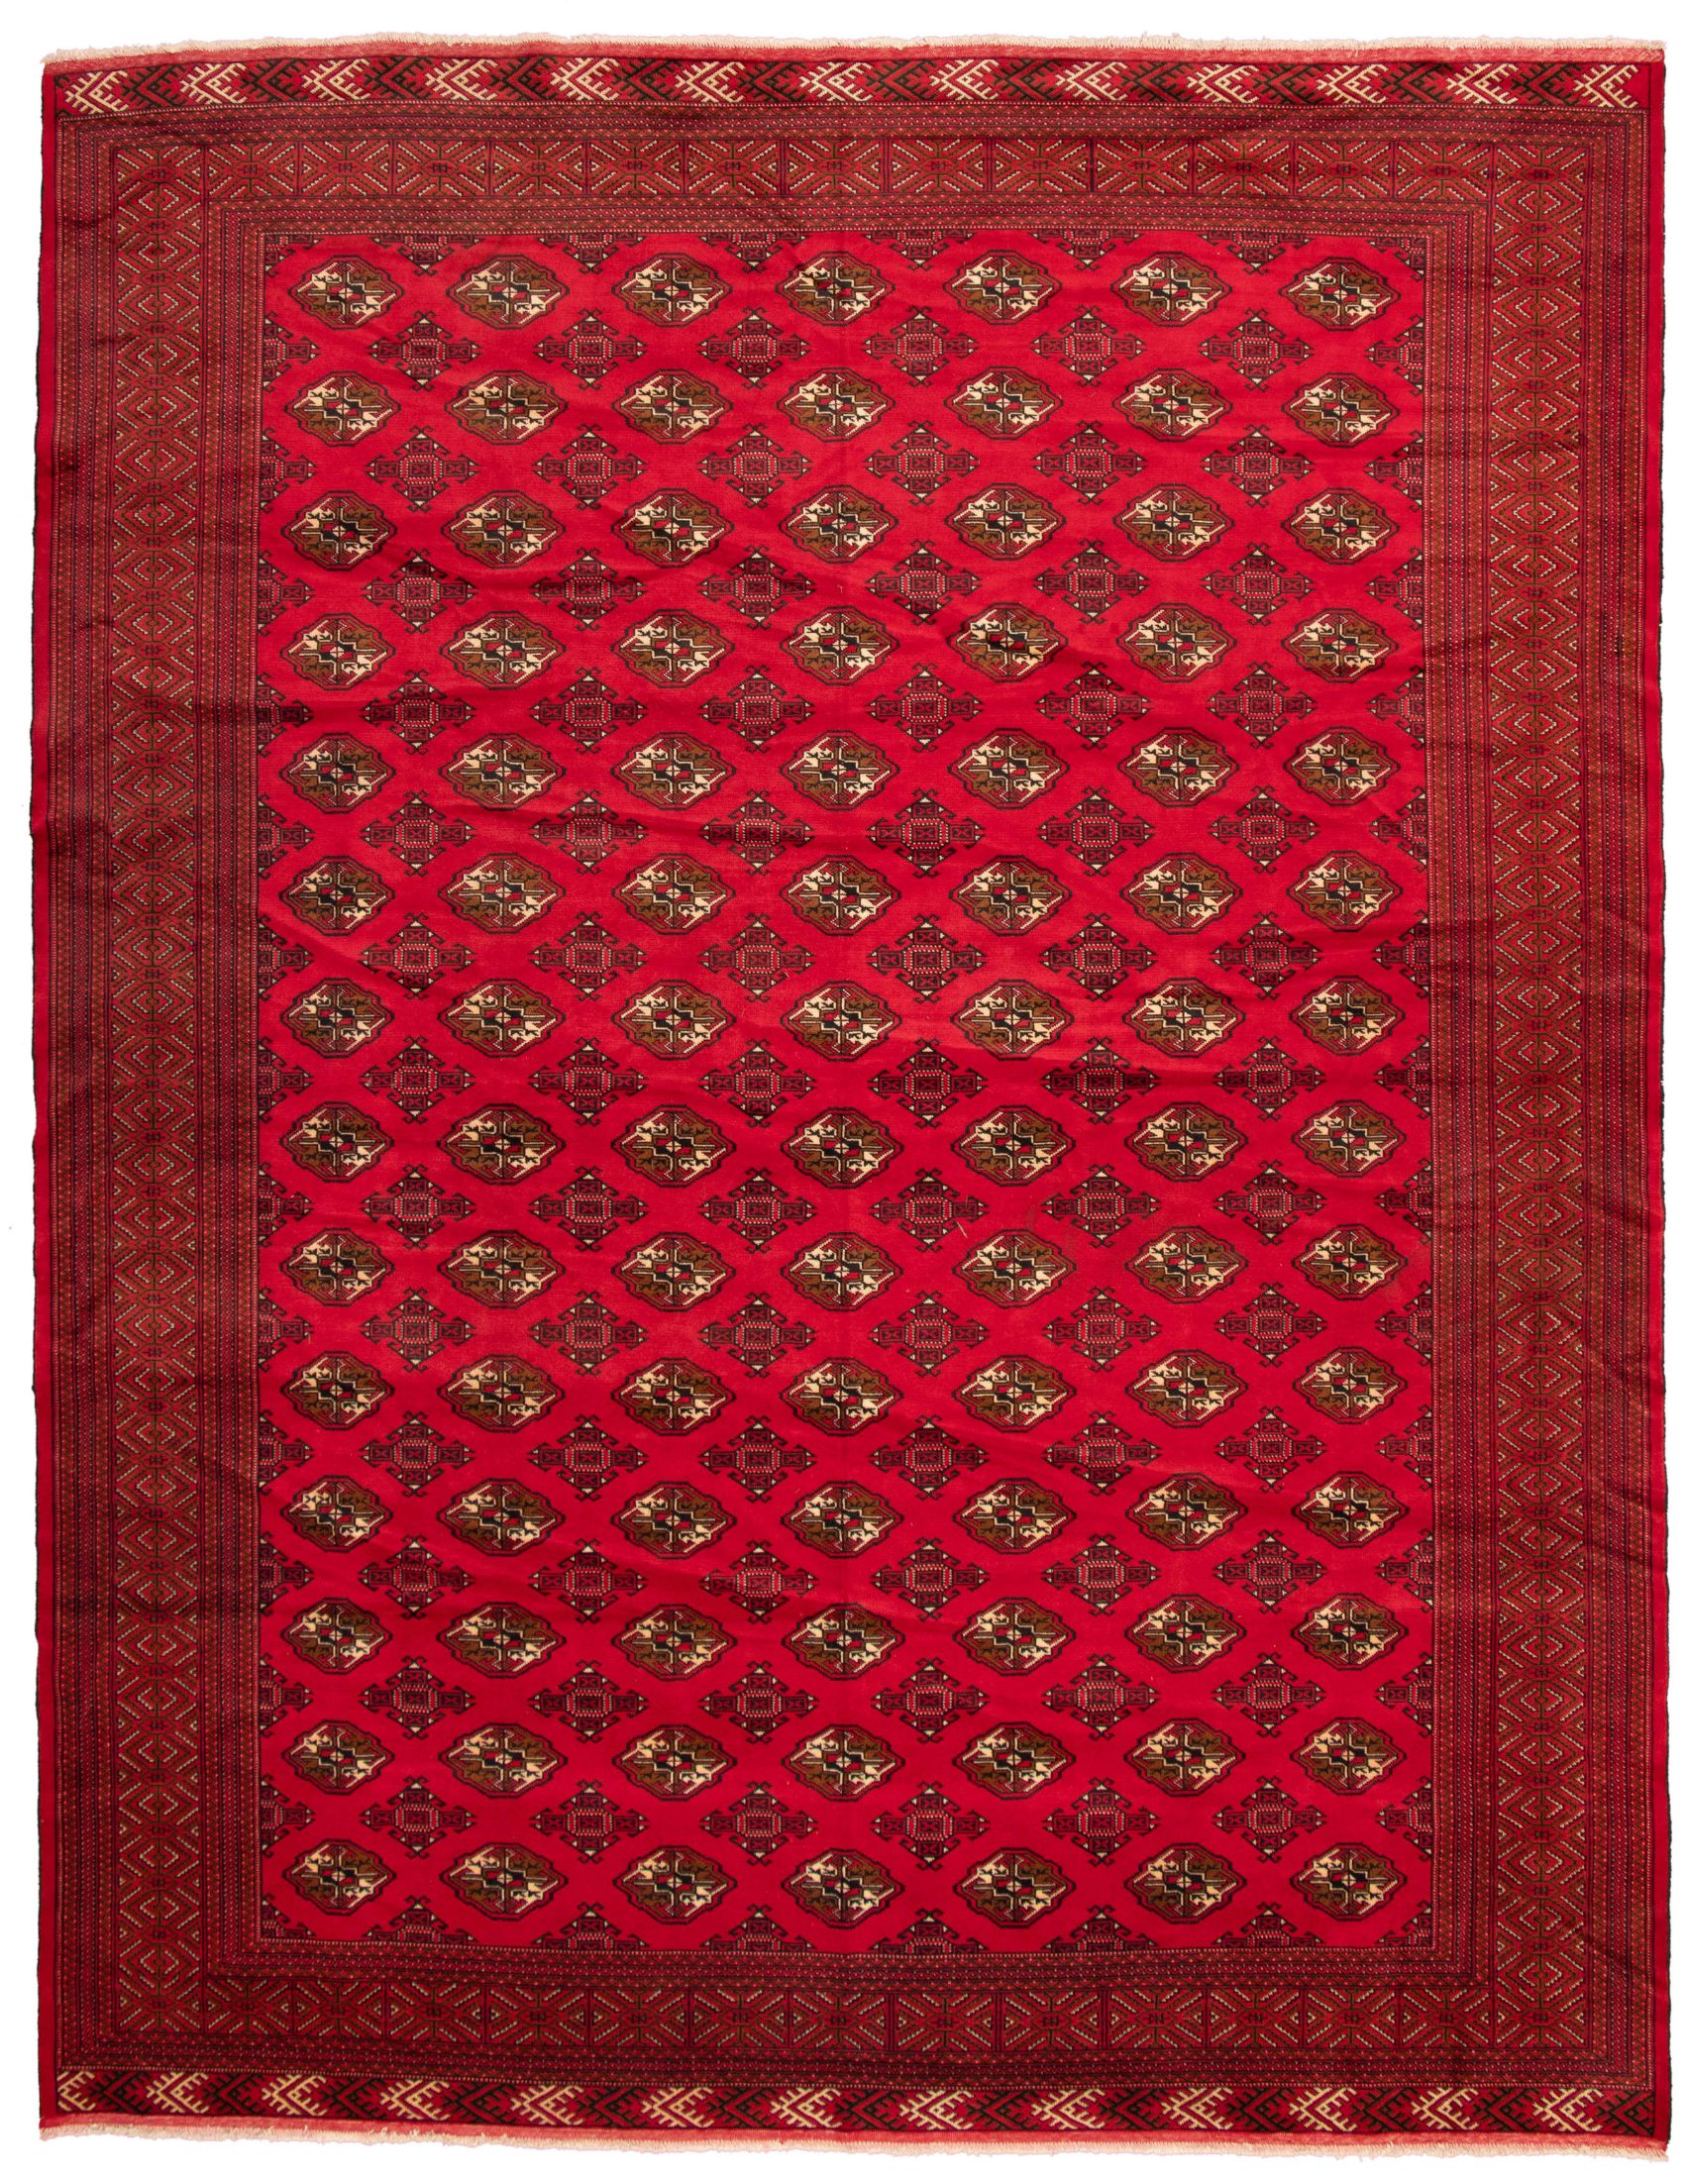 Hand-knotted Teimani Red Wool Rug 10'0" x 12'4" Size: 10'0" x 12'4"  